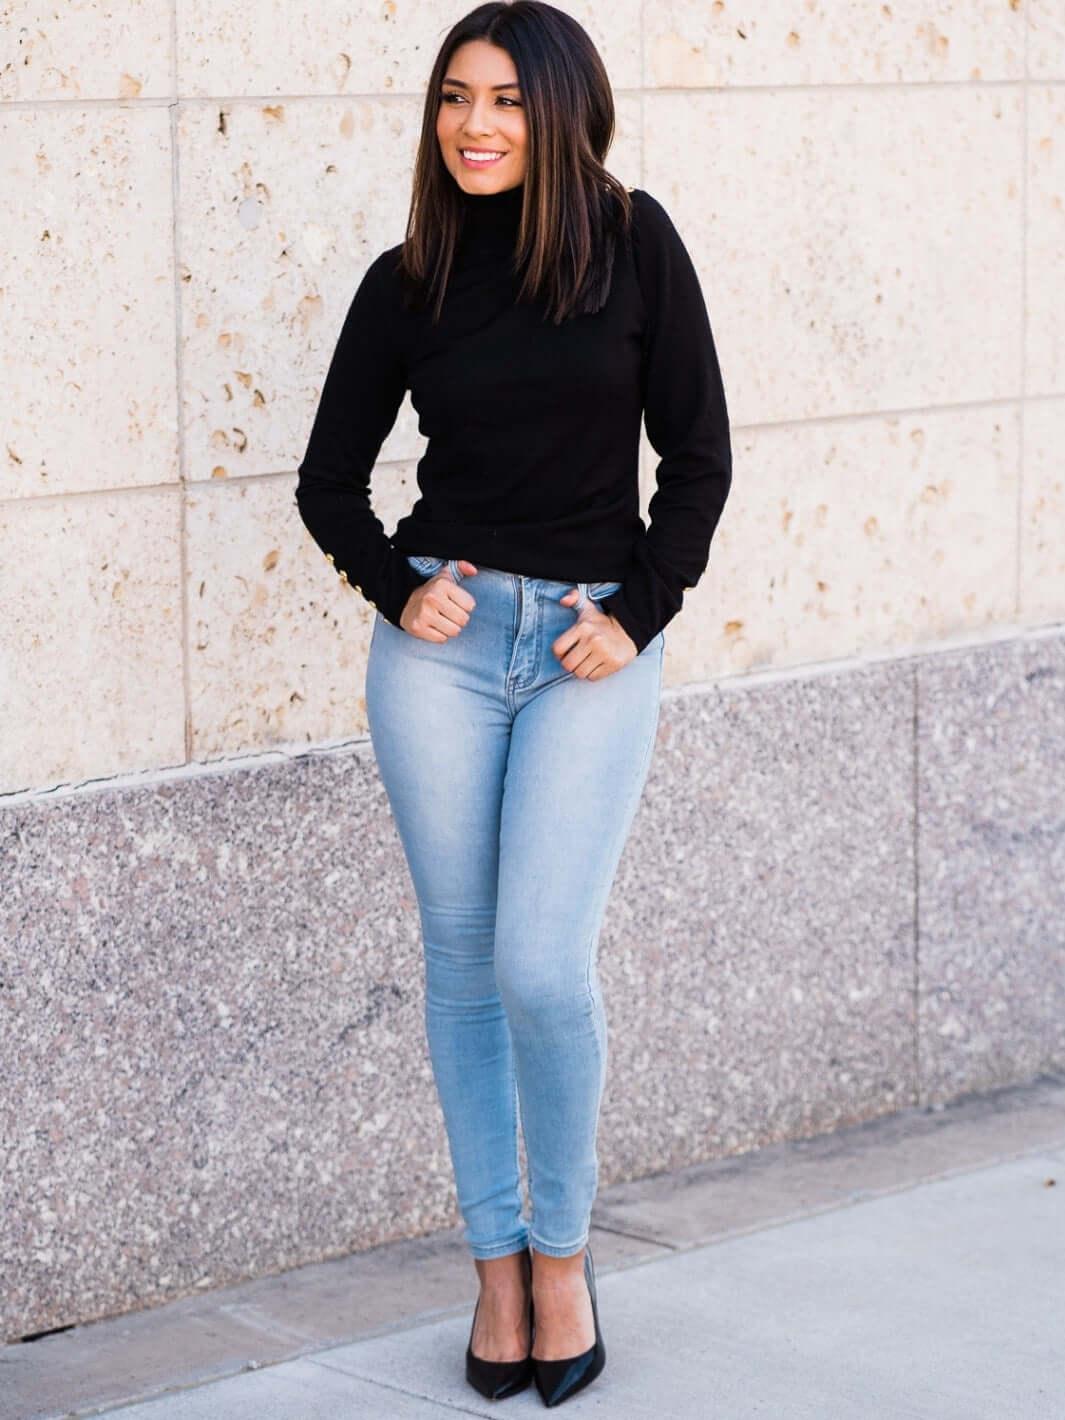 Classy High-Waisted Light Wash Jeans